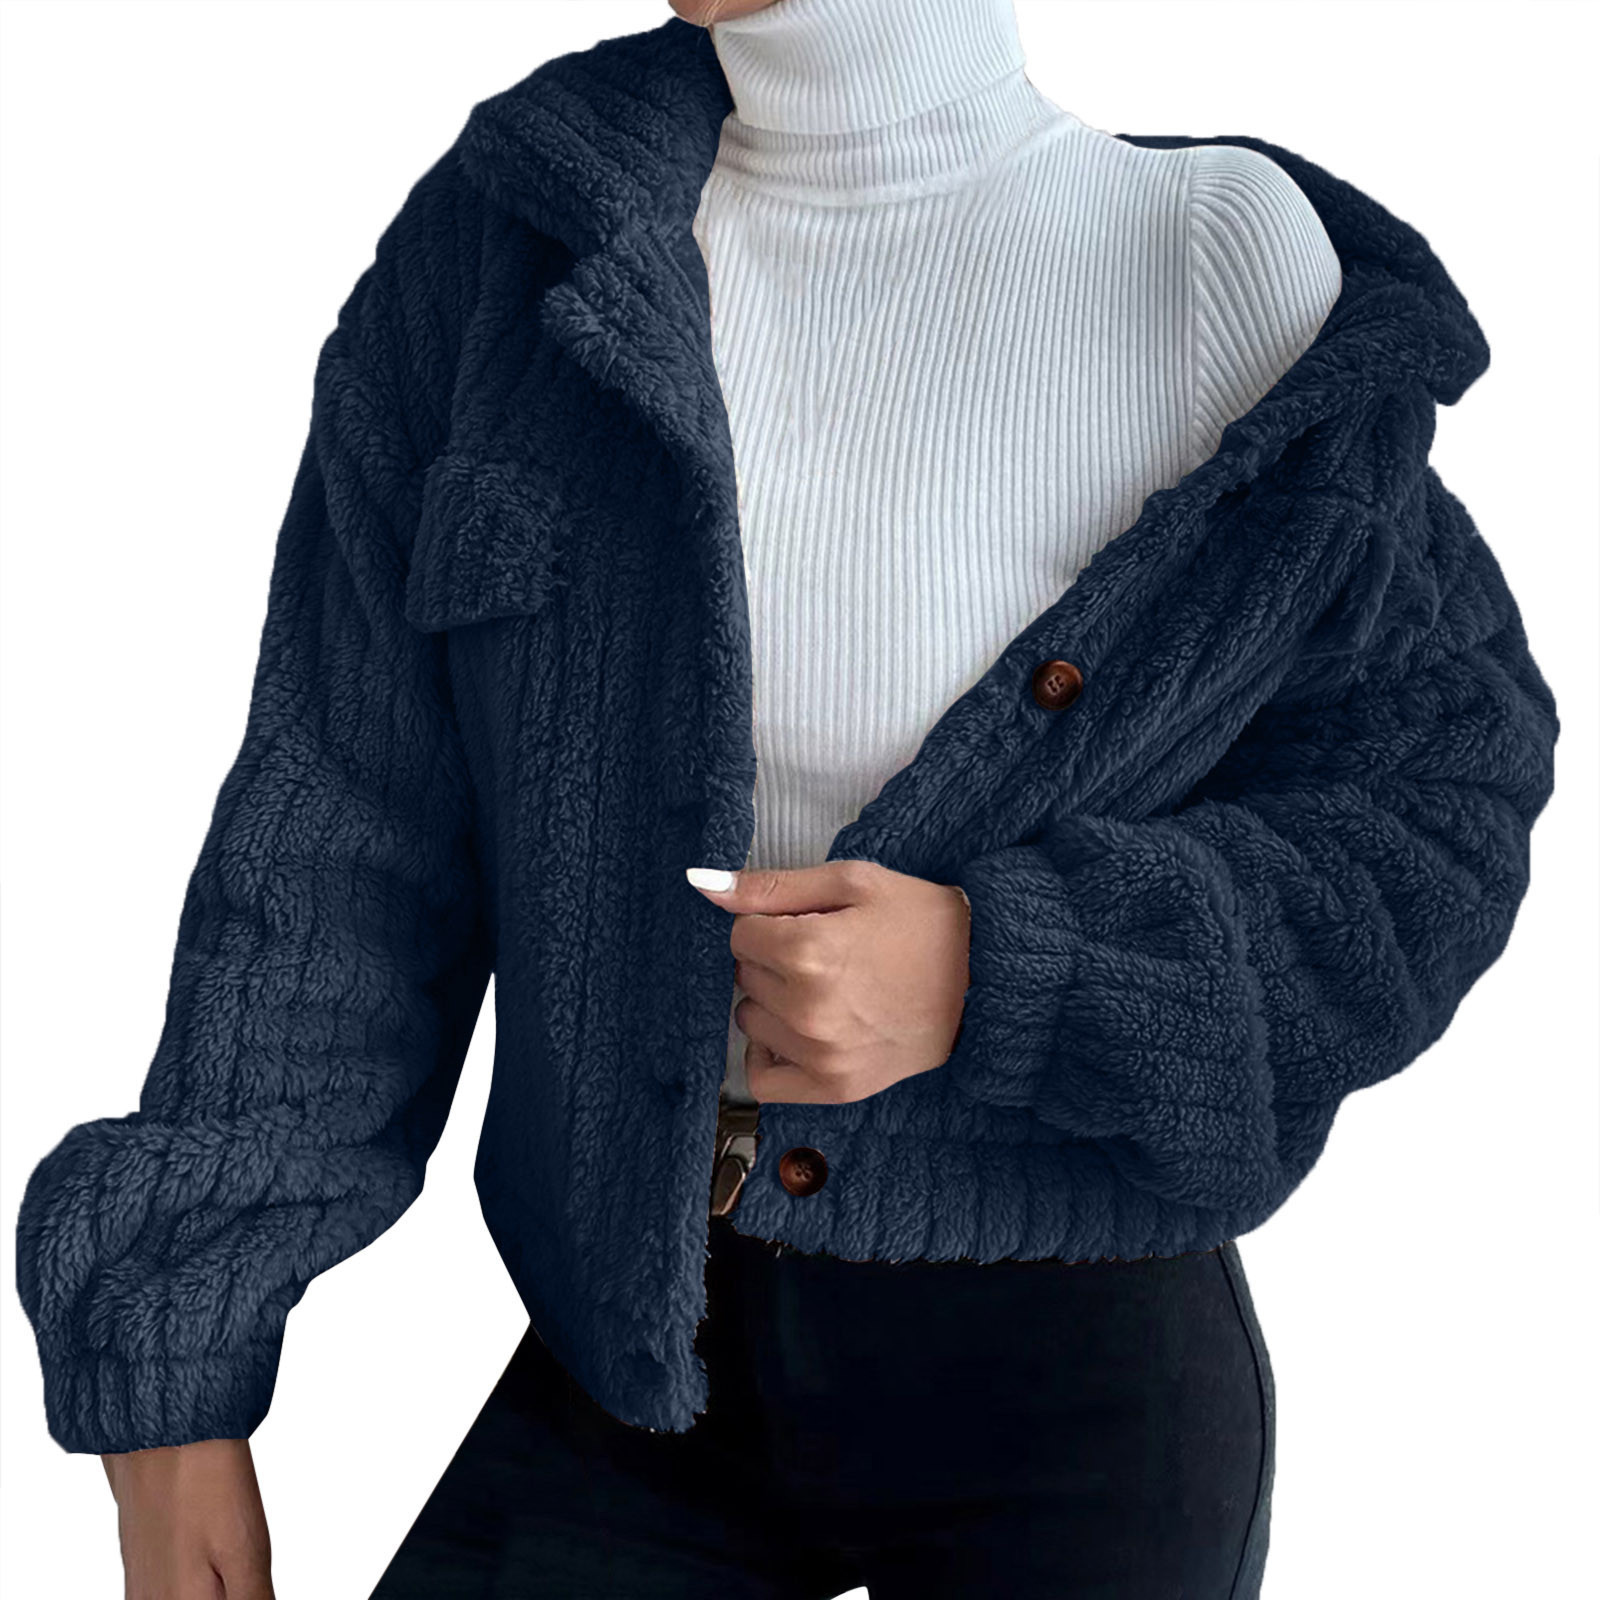 Womens Down Parka Top Selling Wool Long Sleeve Sweatershirtparkas For Women Winter Warm Plush Coat Top Snow Coat Outwear No Pocket With Button 221010